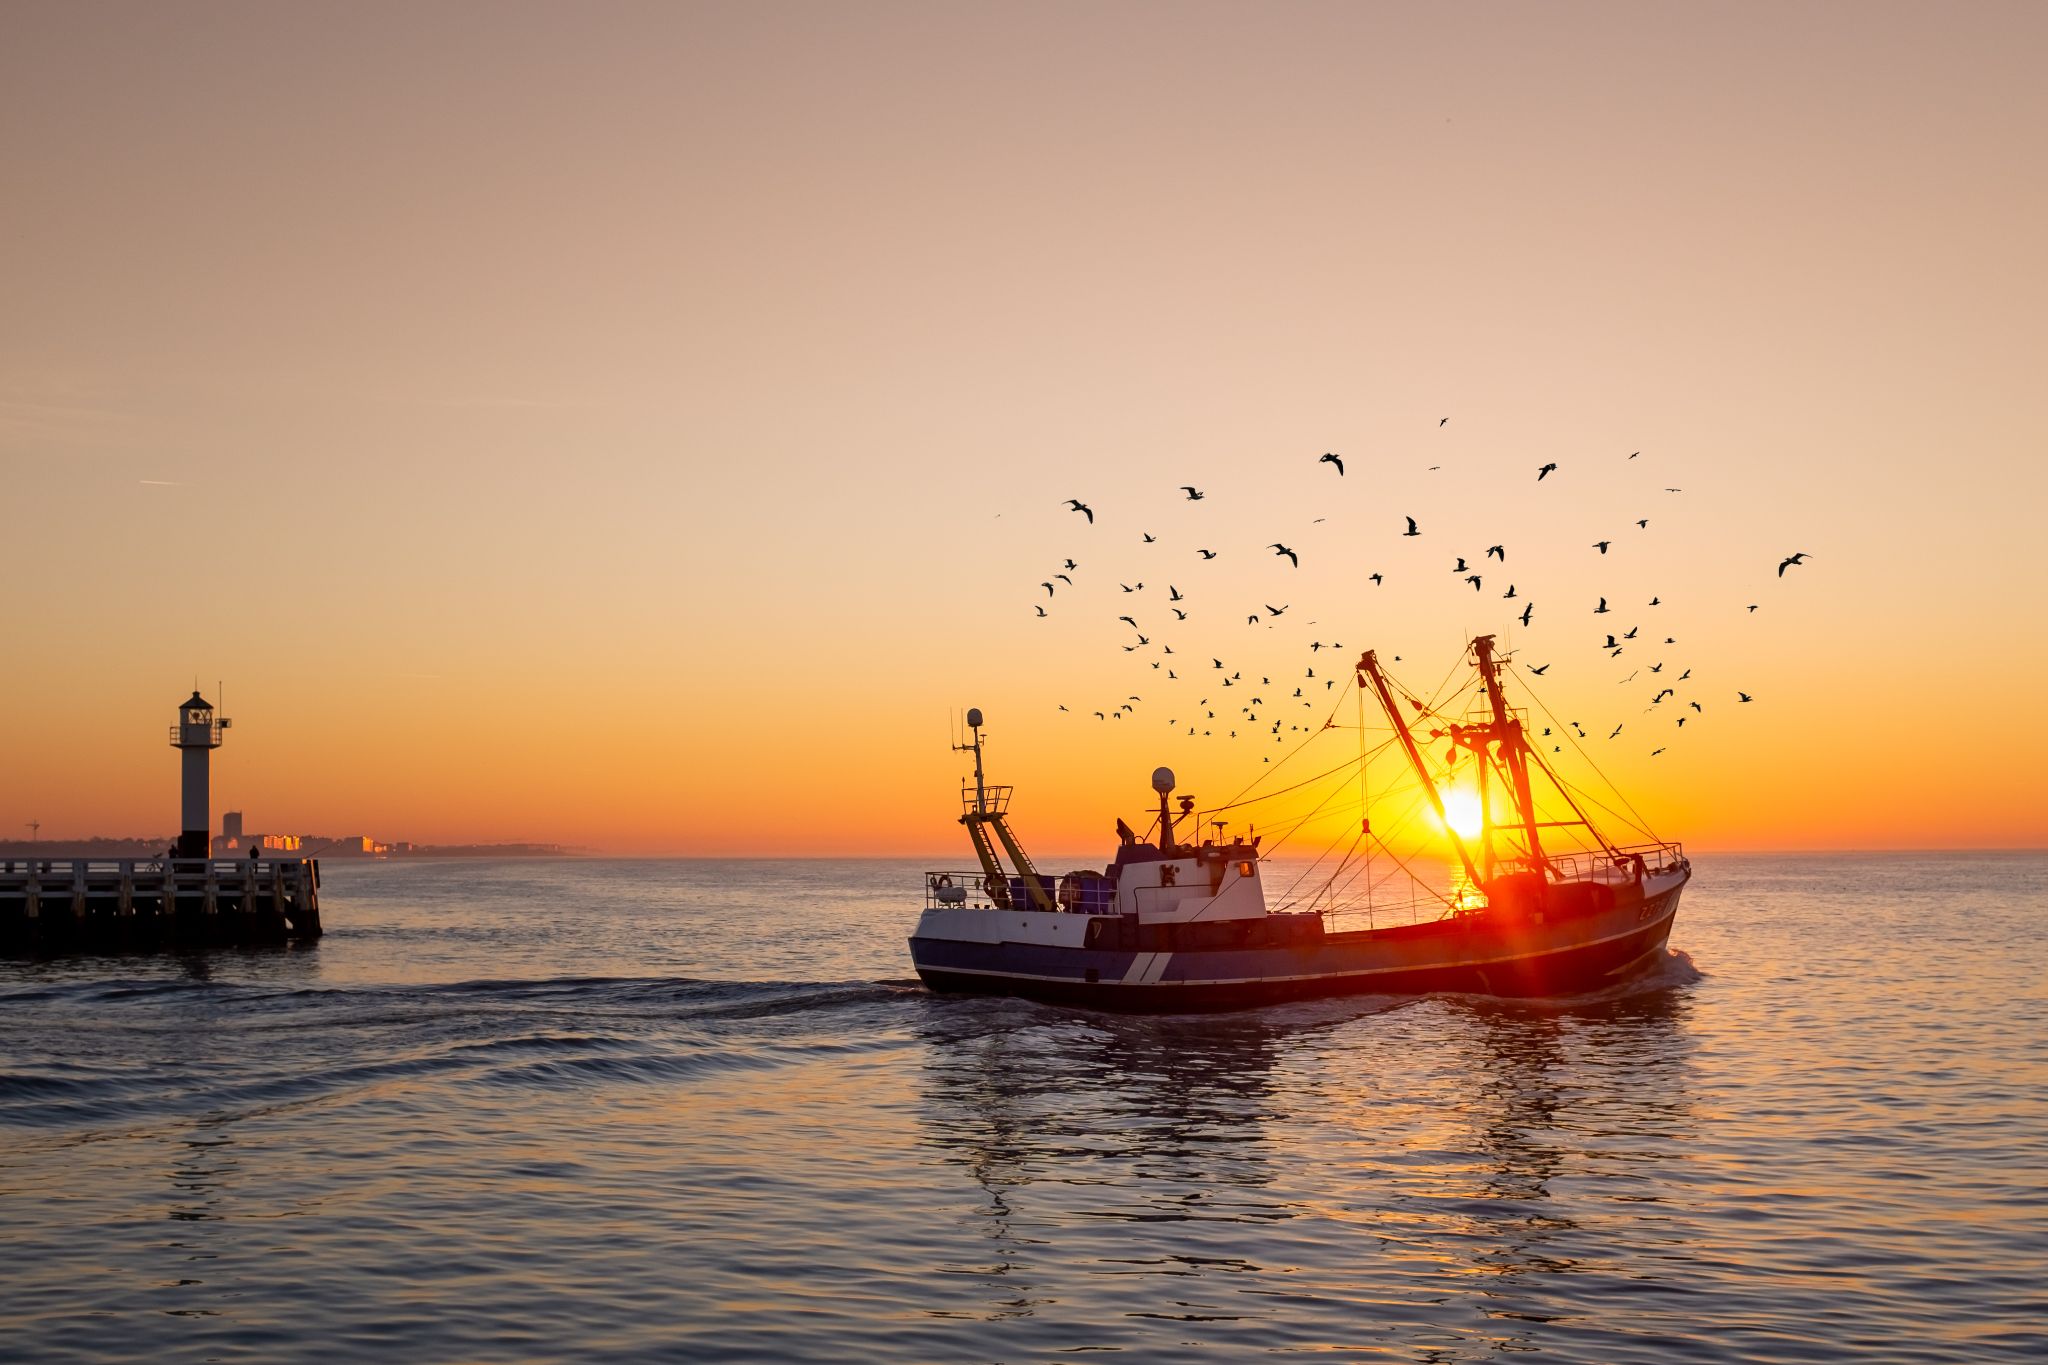 Fishing boat in front of the old wooden pier of Nieuwpoort at sunset